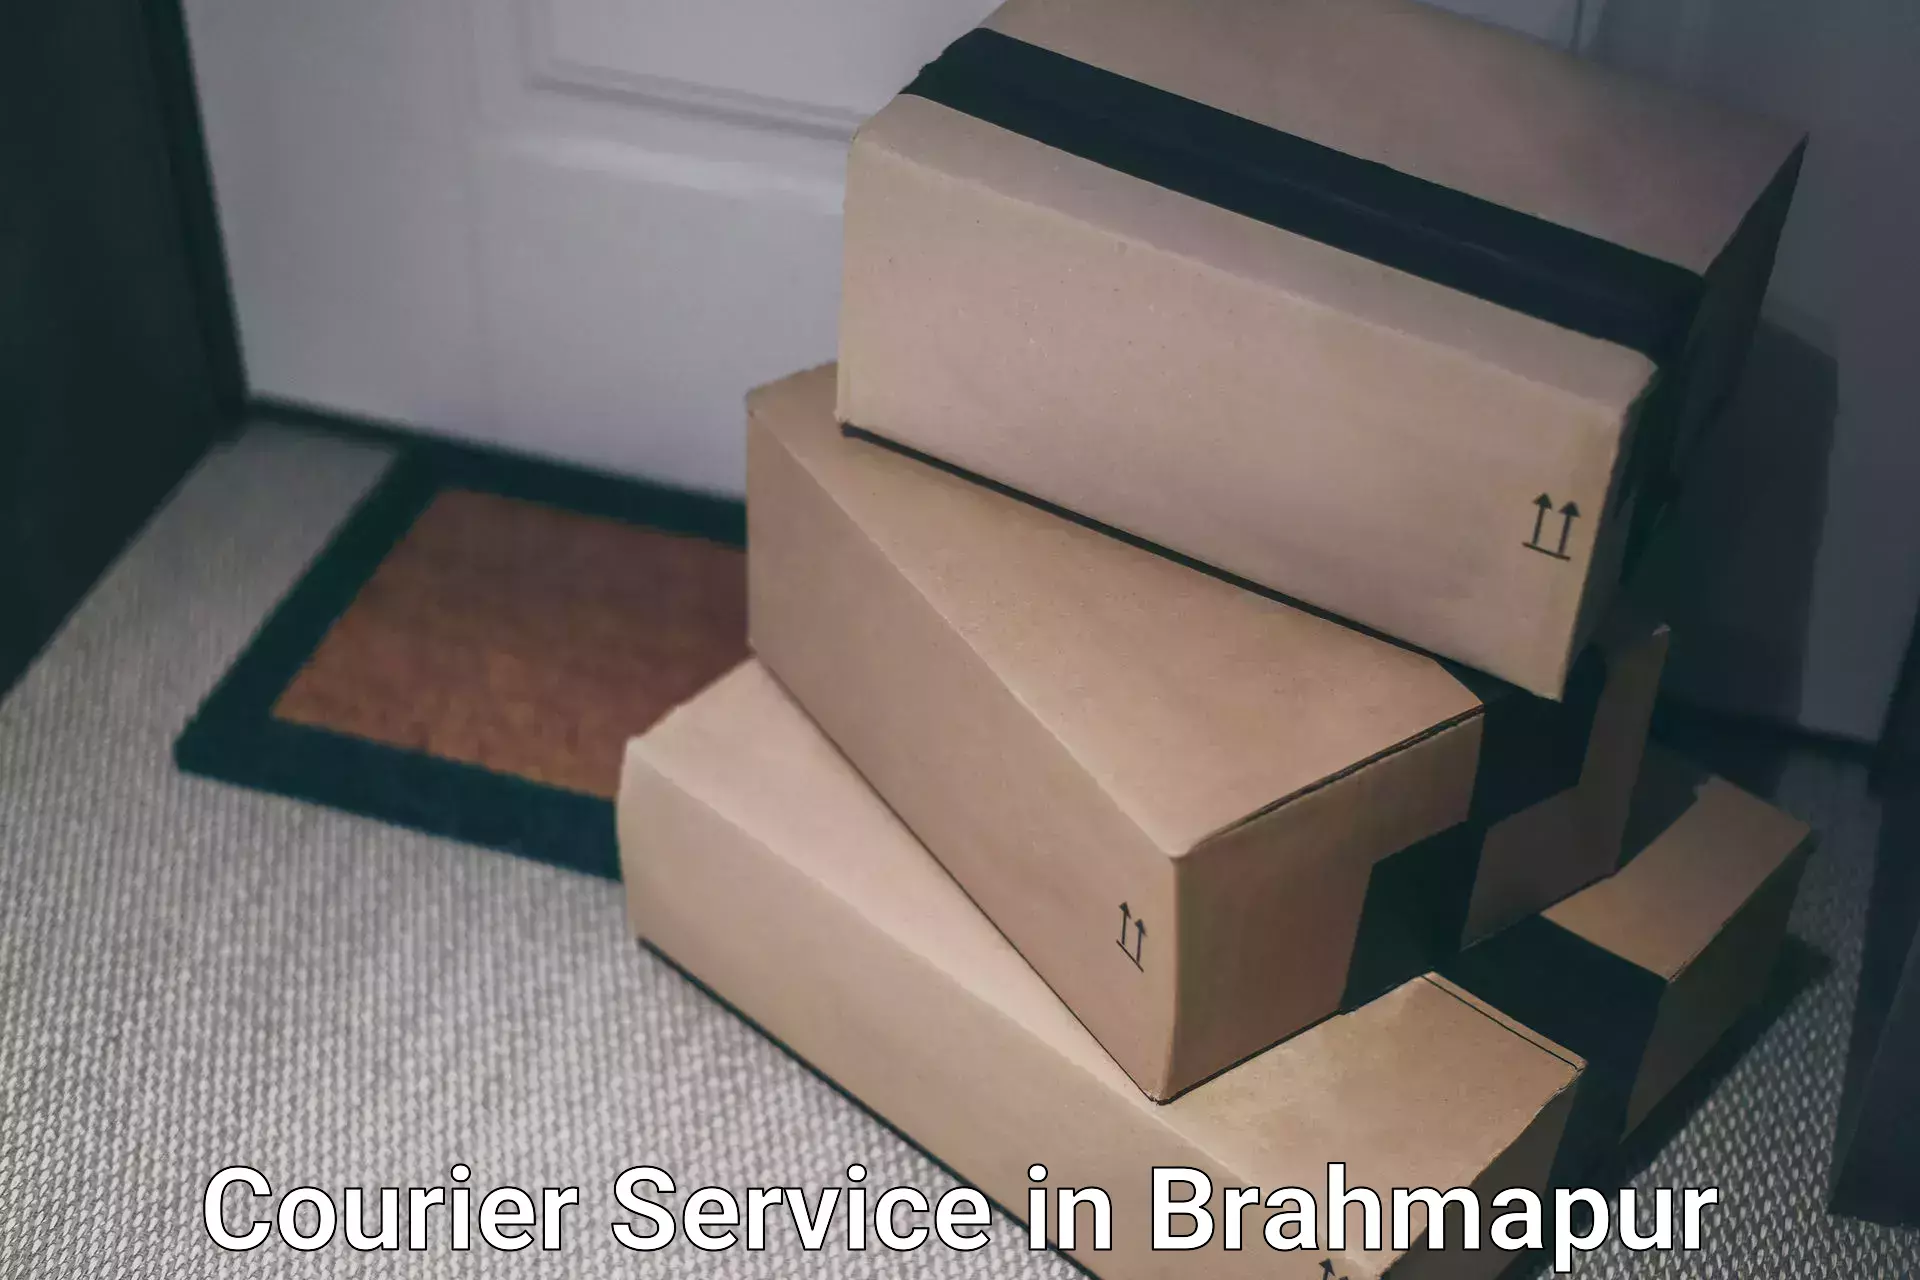 Advanced delivery network in Brahmapur